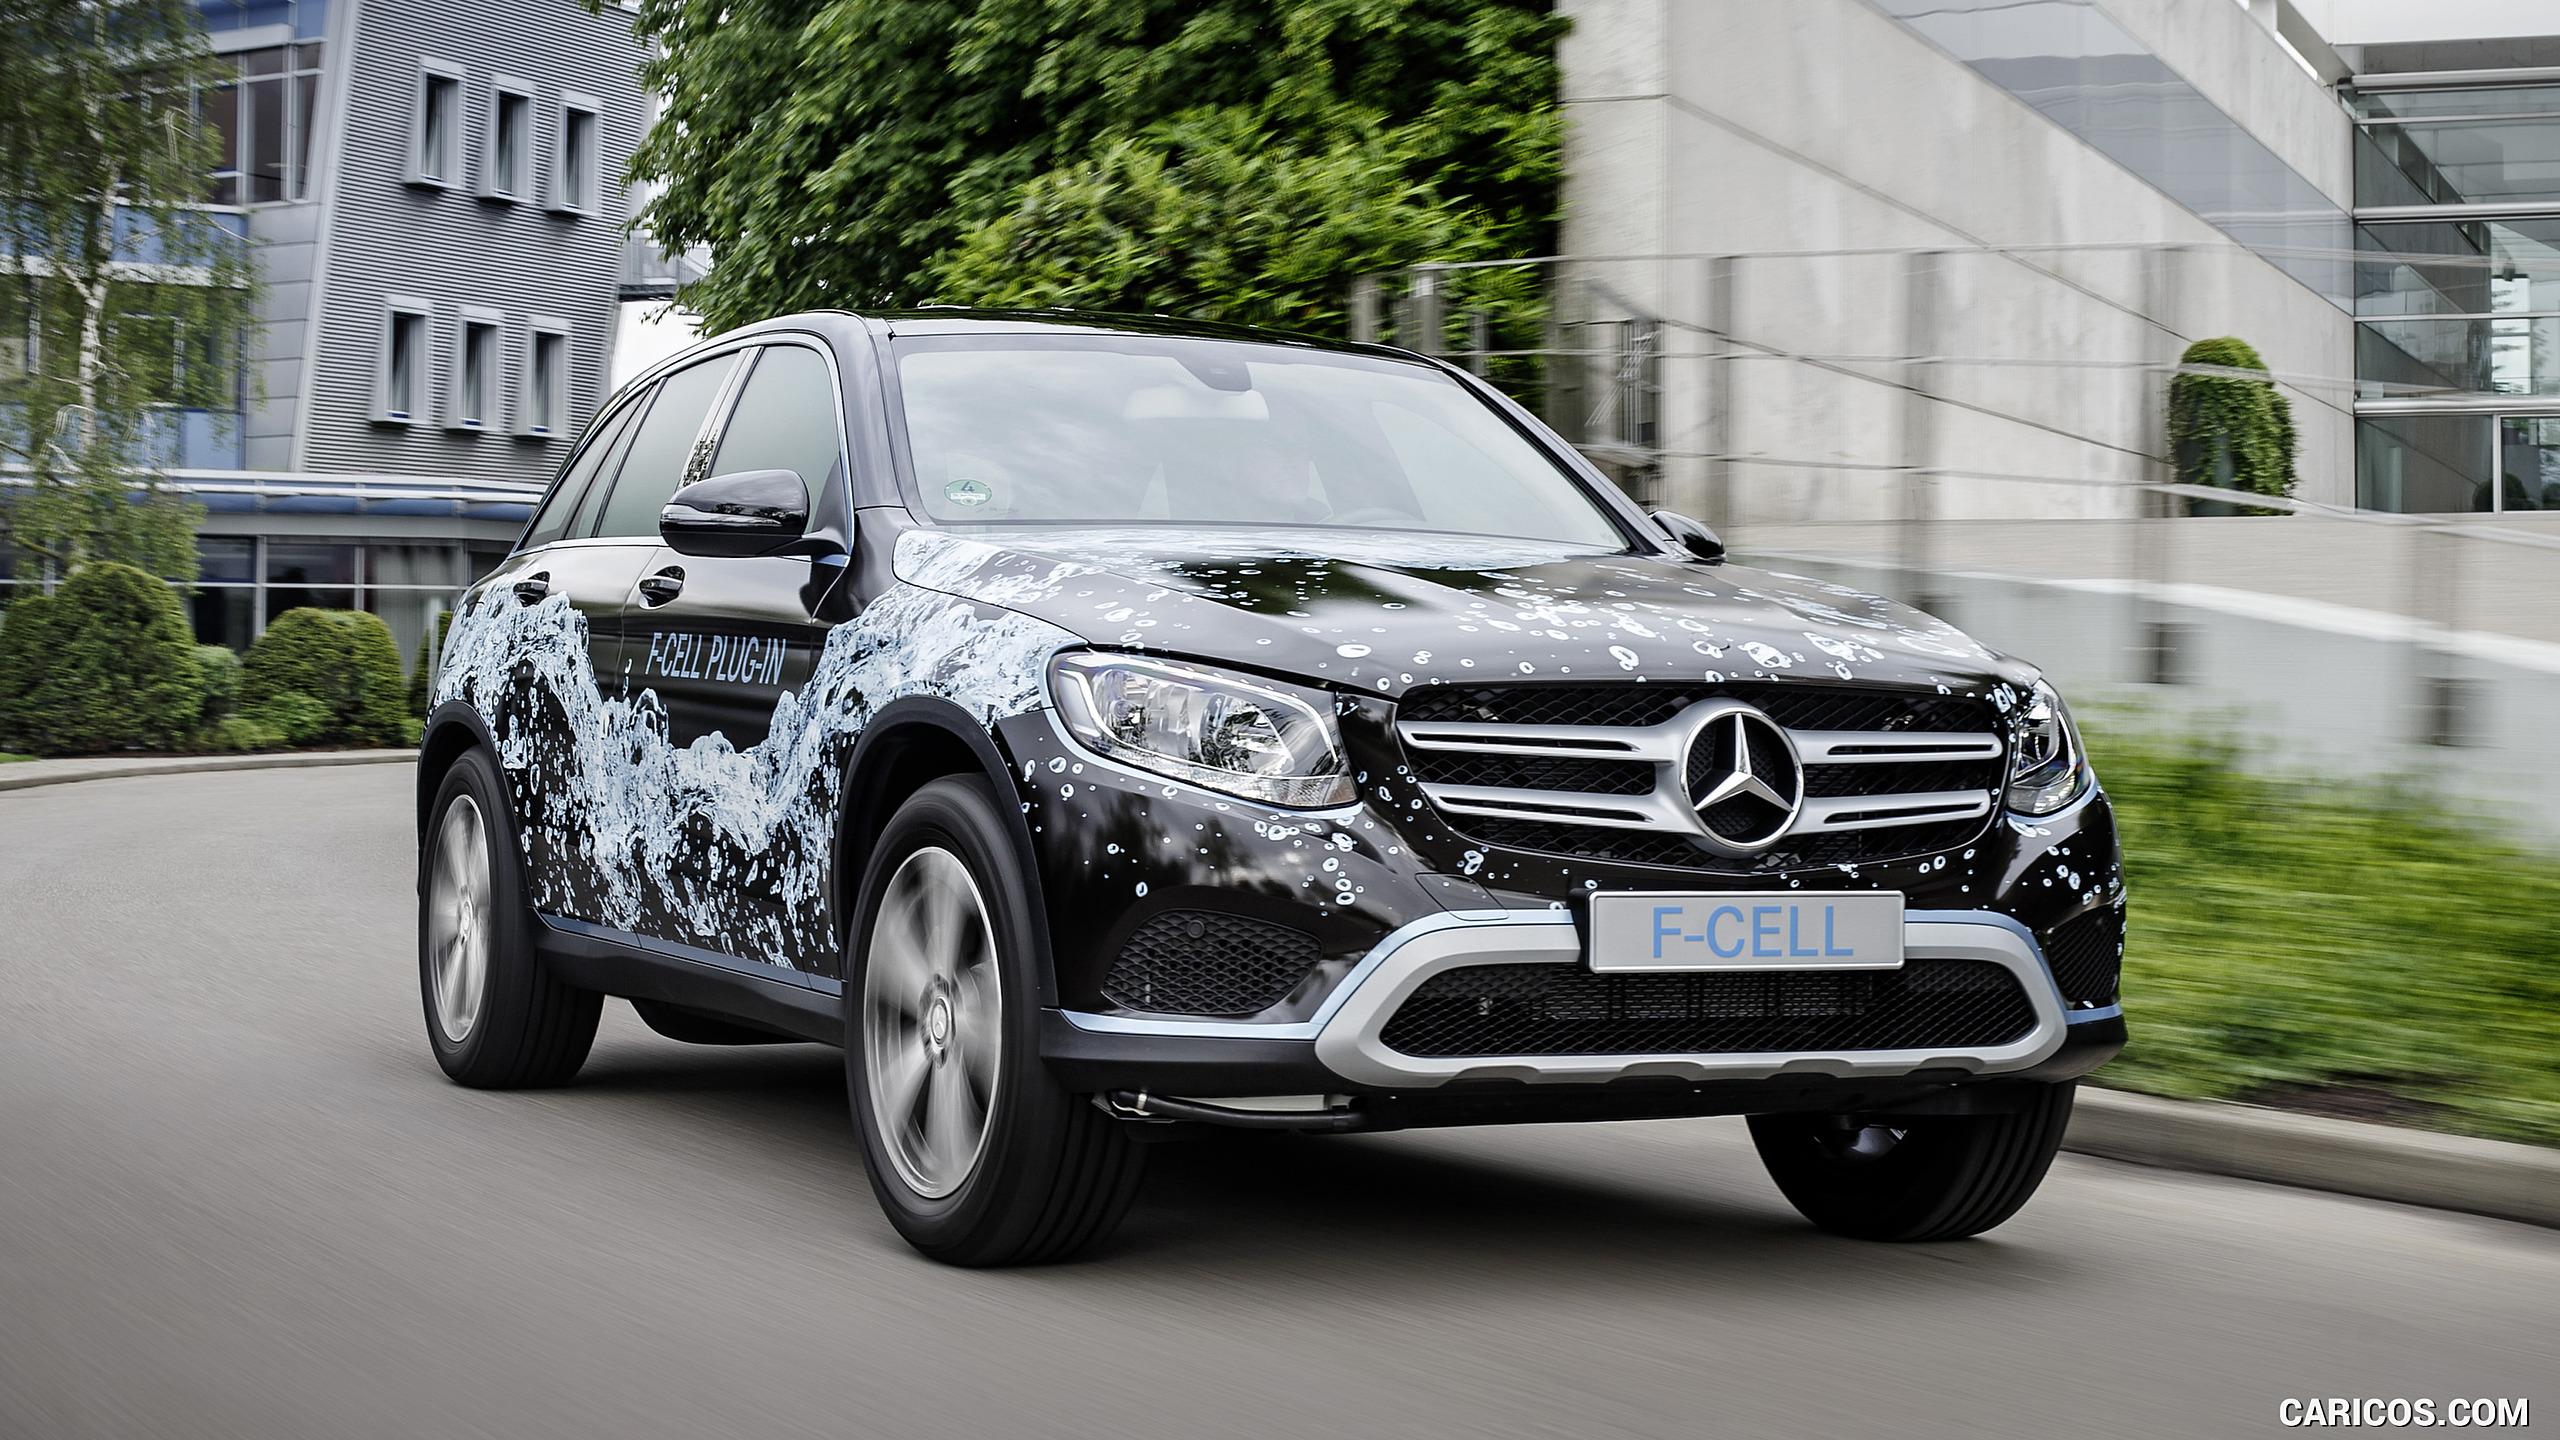 2016 Mercedes-Benz GLC F-Cell Plug-In Concept - Front, #3 of 20